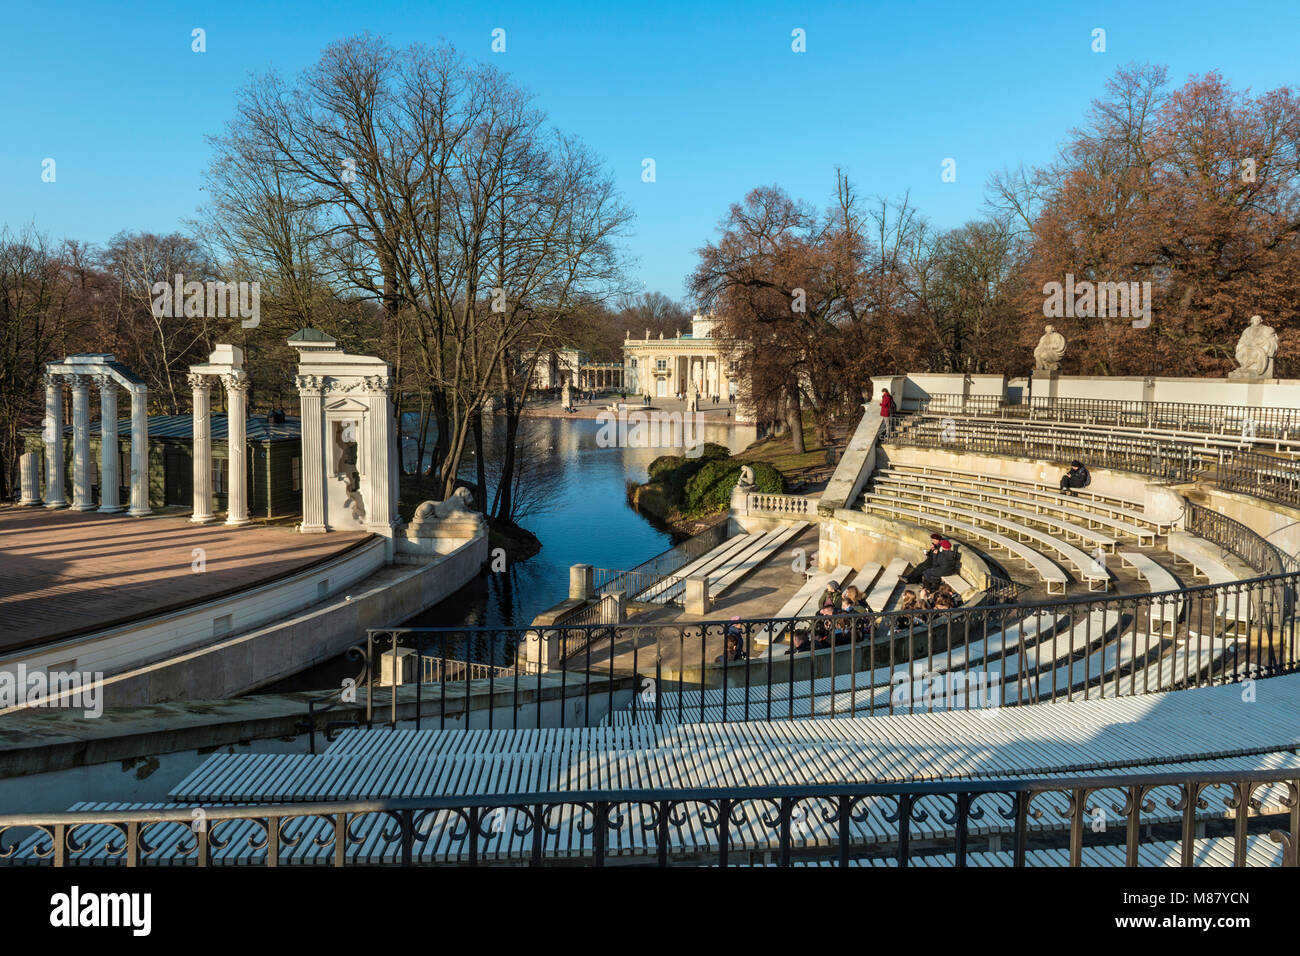 Palace on the Water and the amphitheatre of the Palace on the Isle, at the Warsaw's Royal Baths Park. Stock Photo